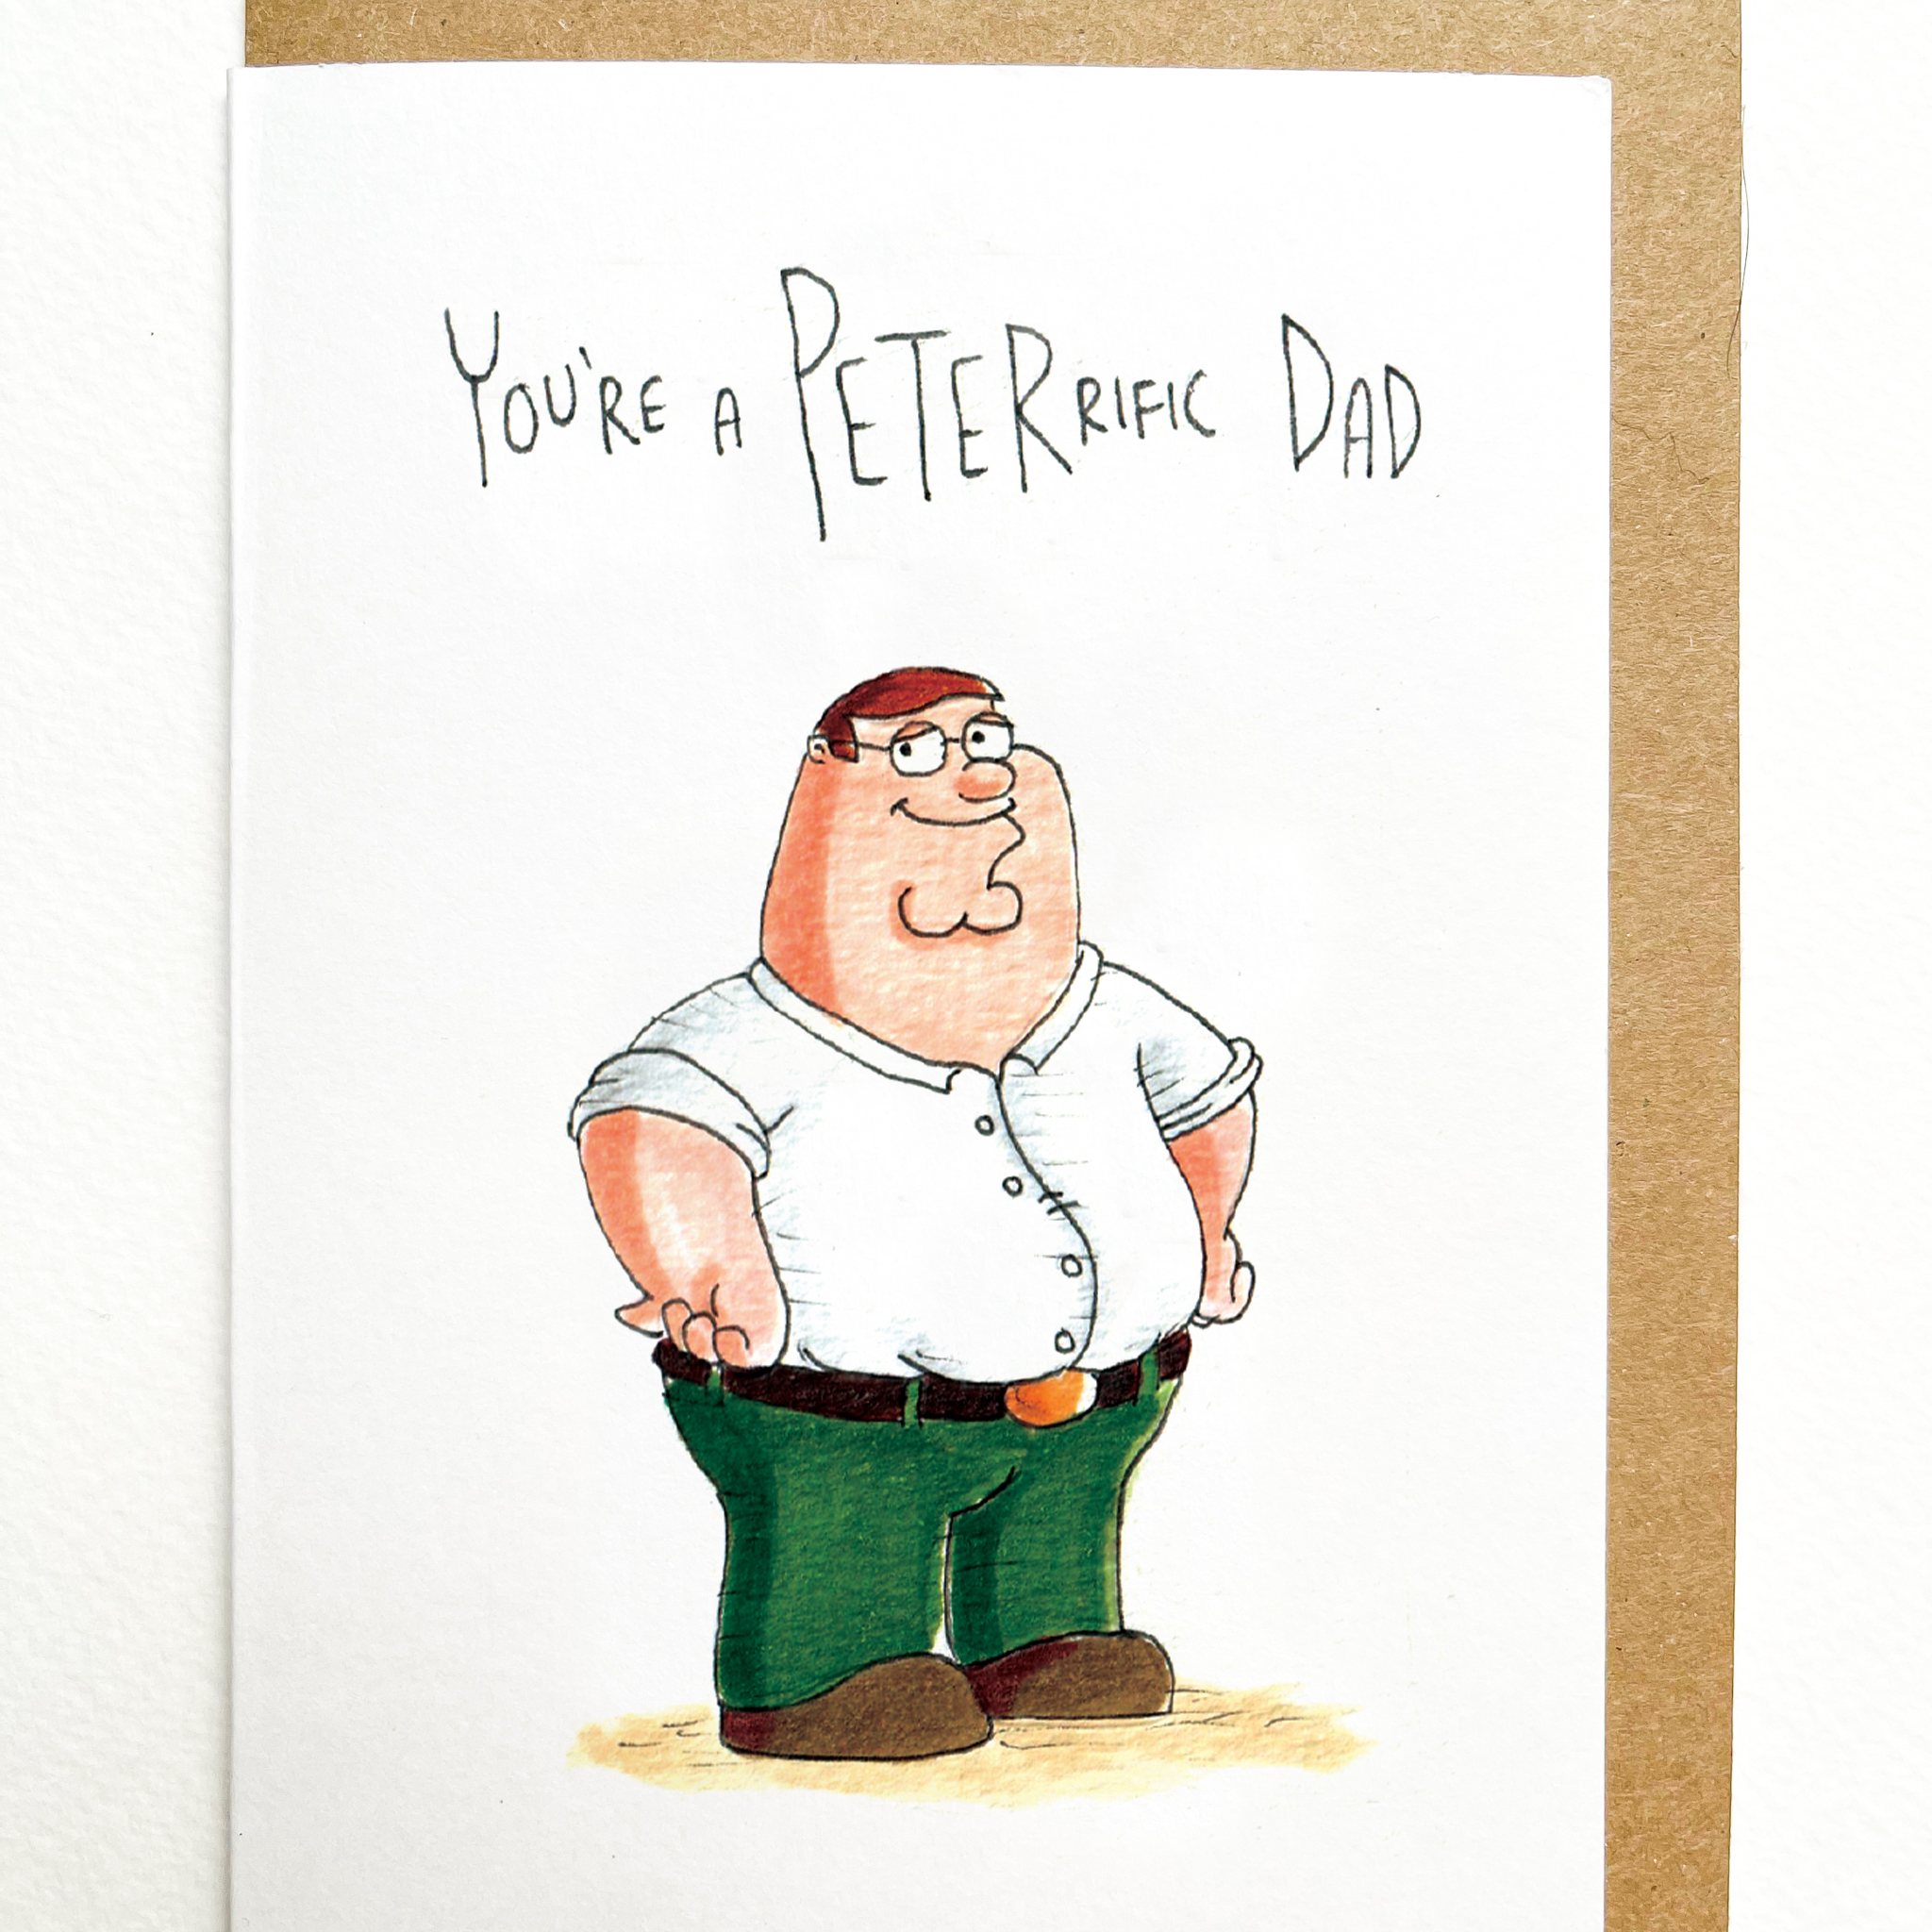 You're a Peterrific Dad